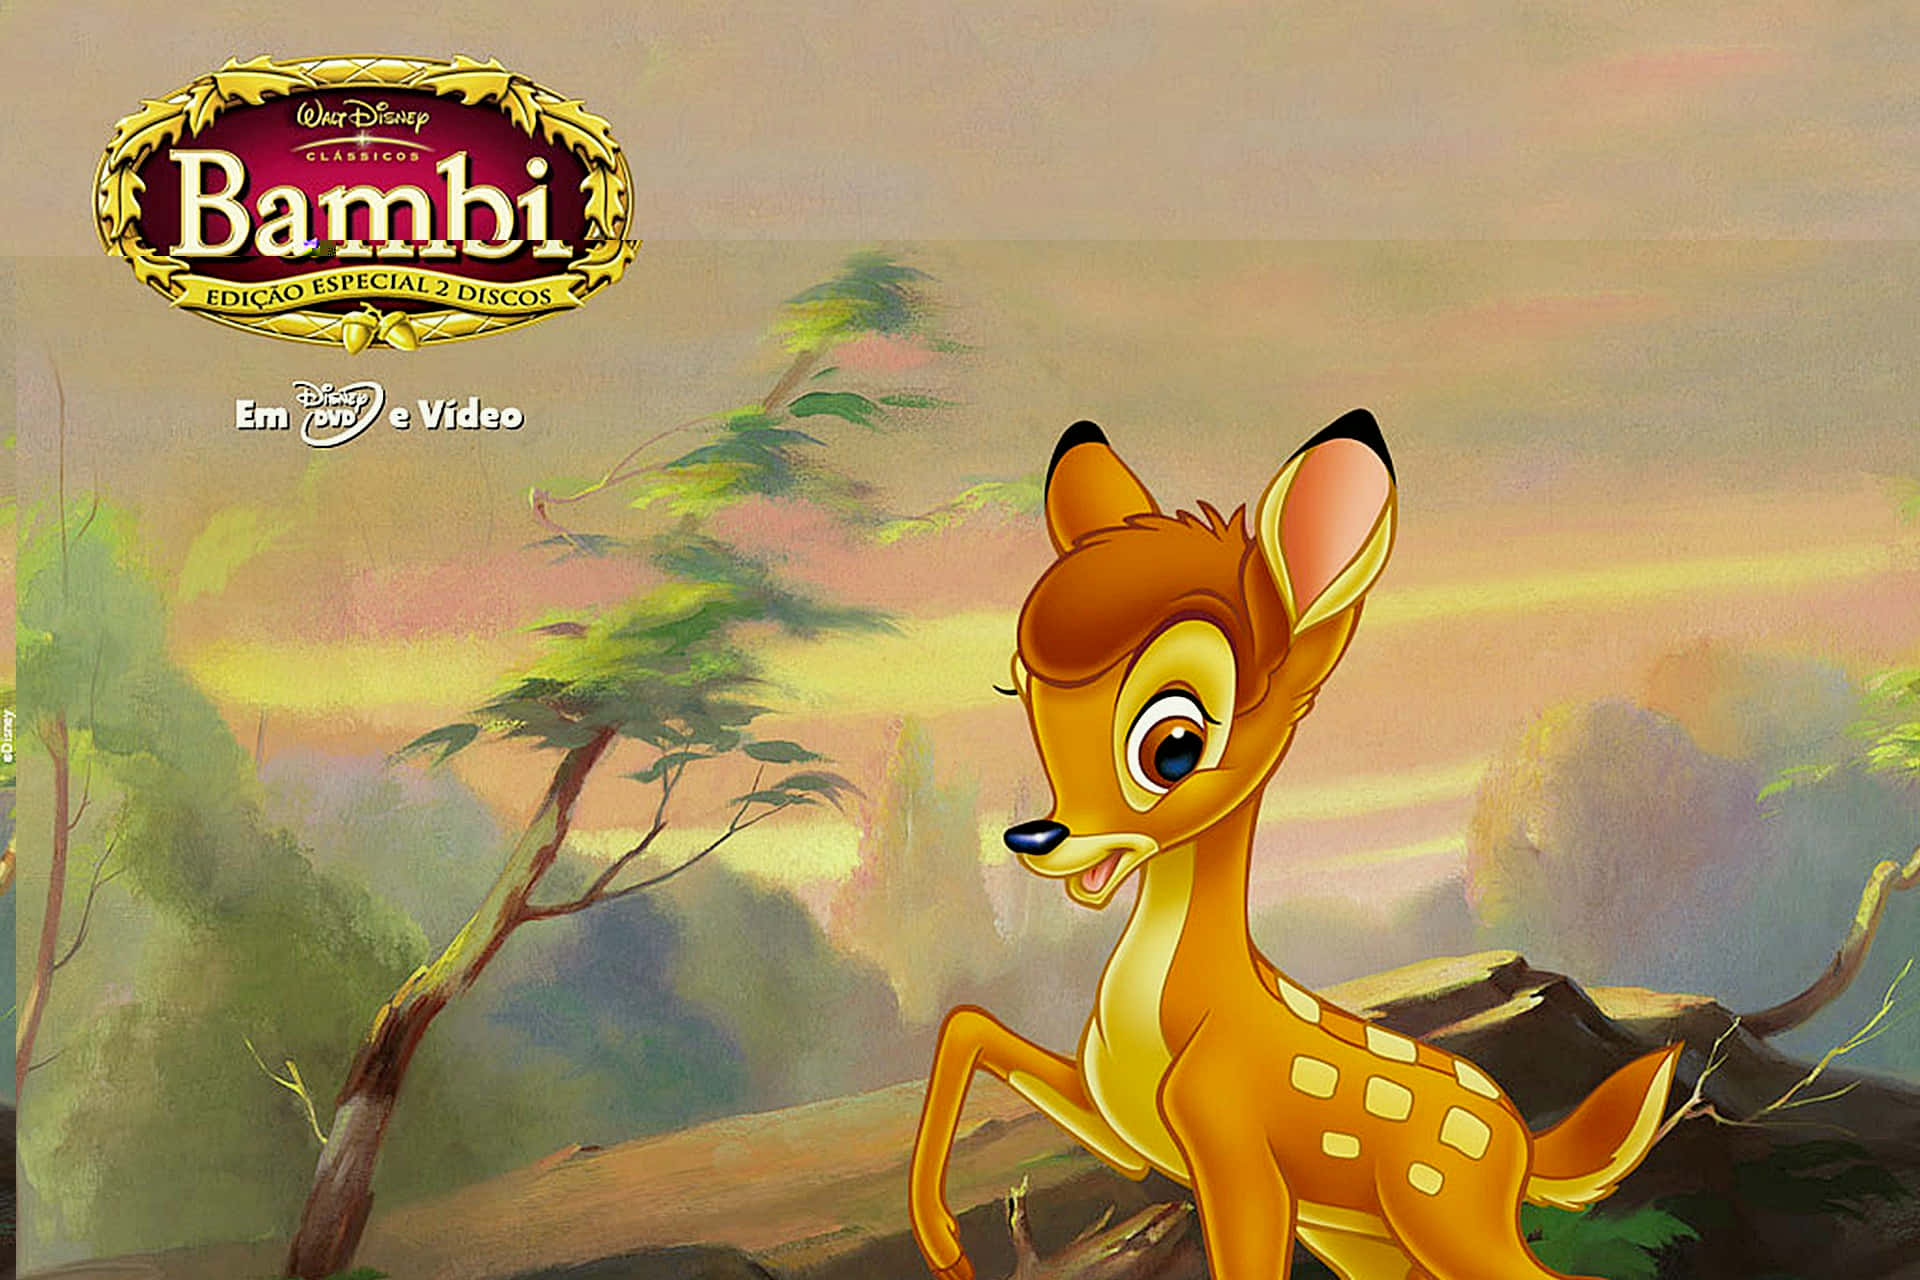 Bambi, Disney's beloved animated deer, looks out into the world with hope